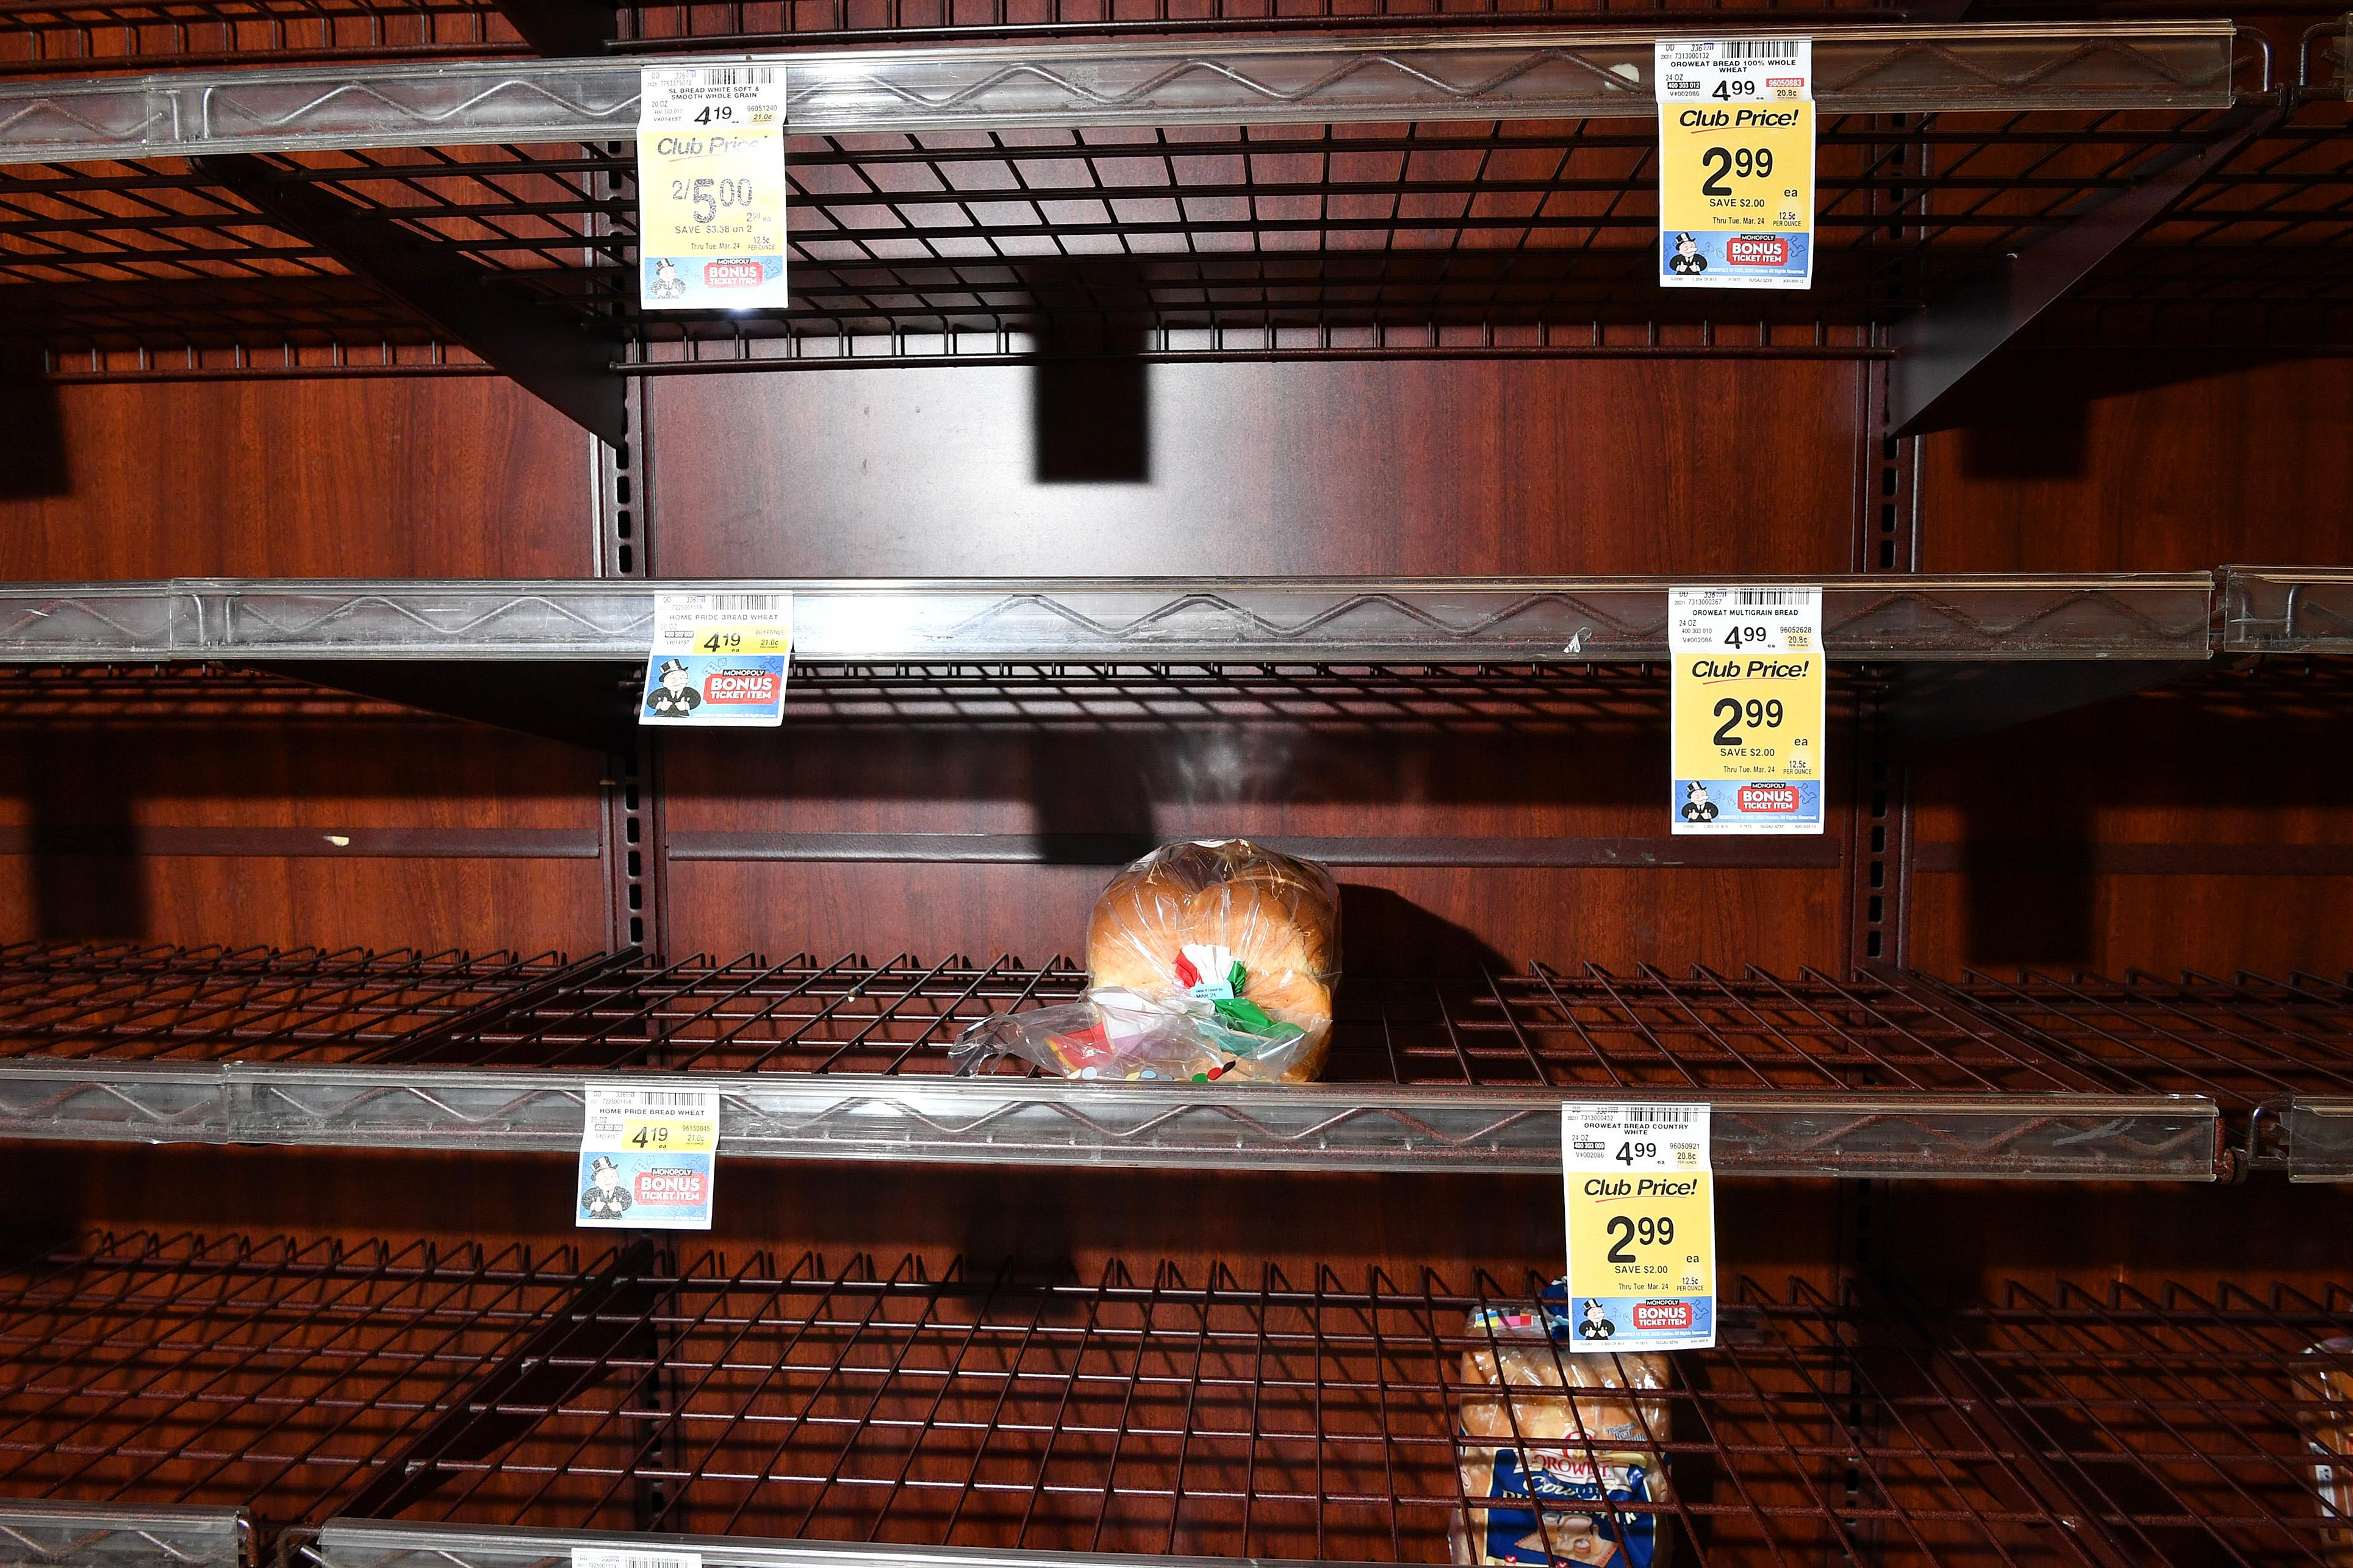 Two loaves of bread sit on otherwise empty grocery store shelves.